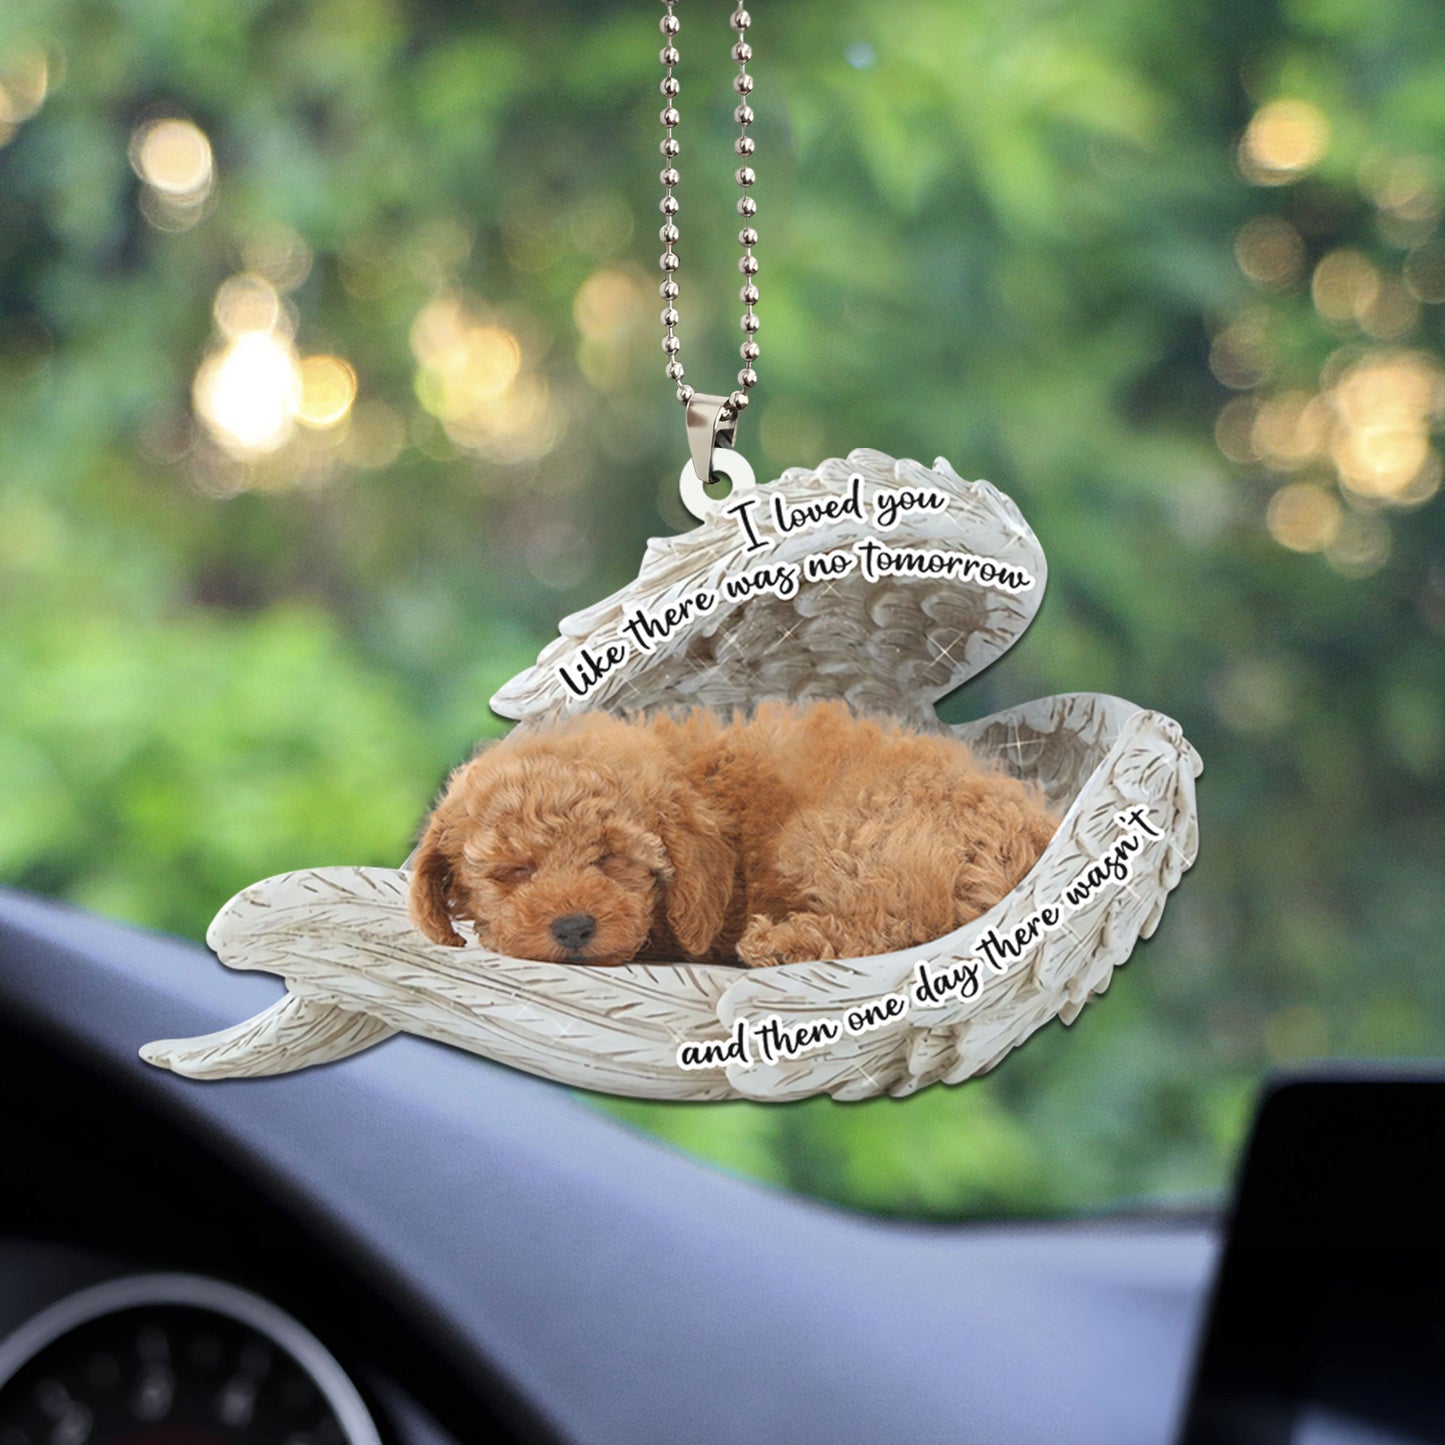 Poodle Sleeping Angel Personalizedwitch Flat Car Ornament